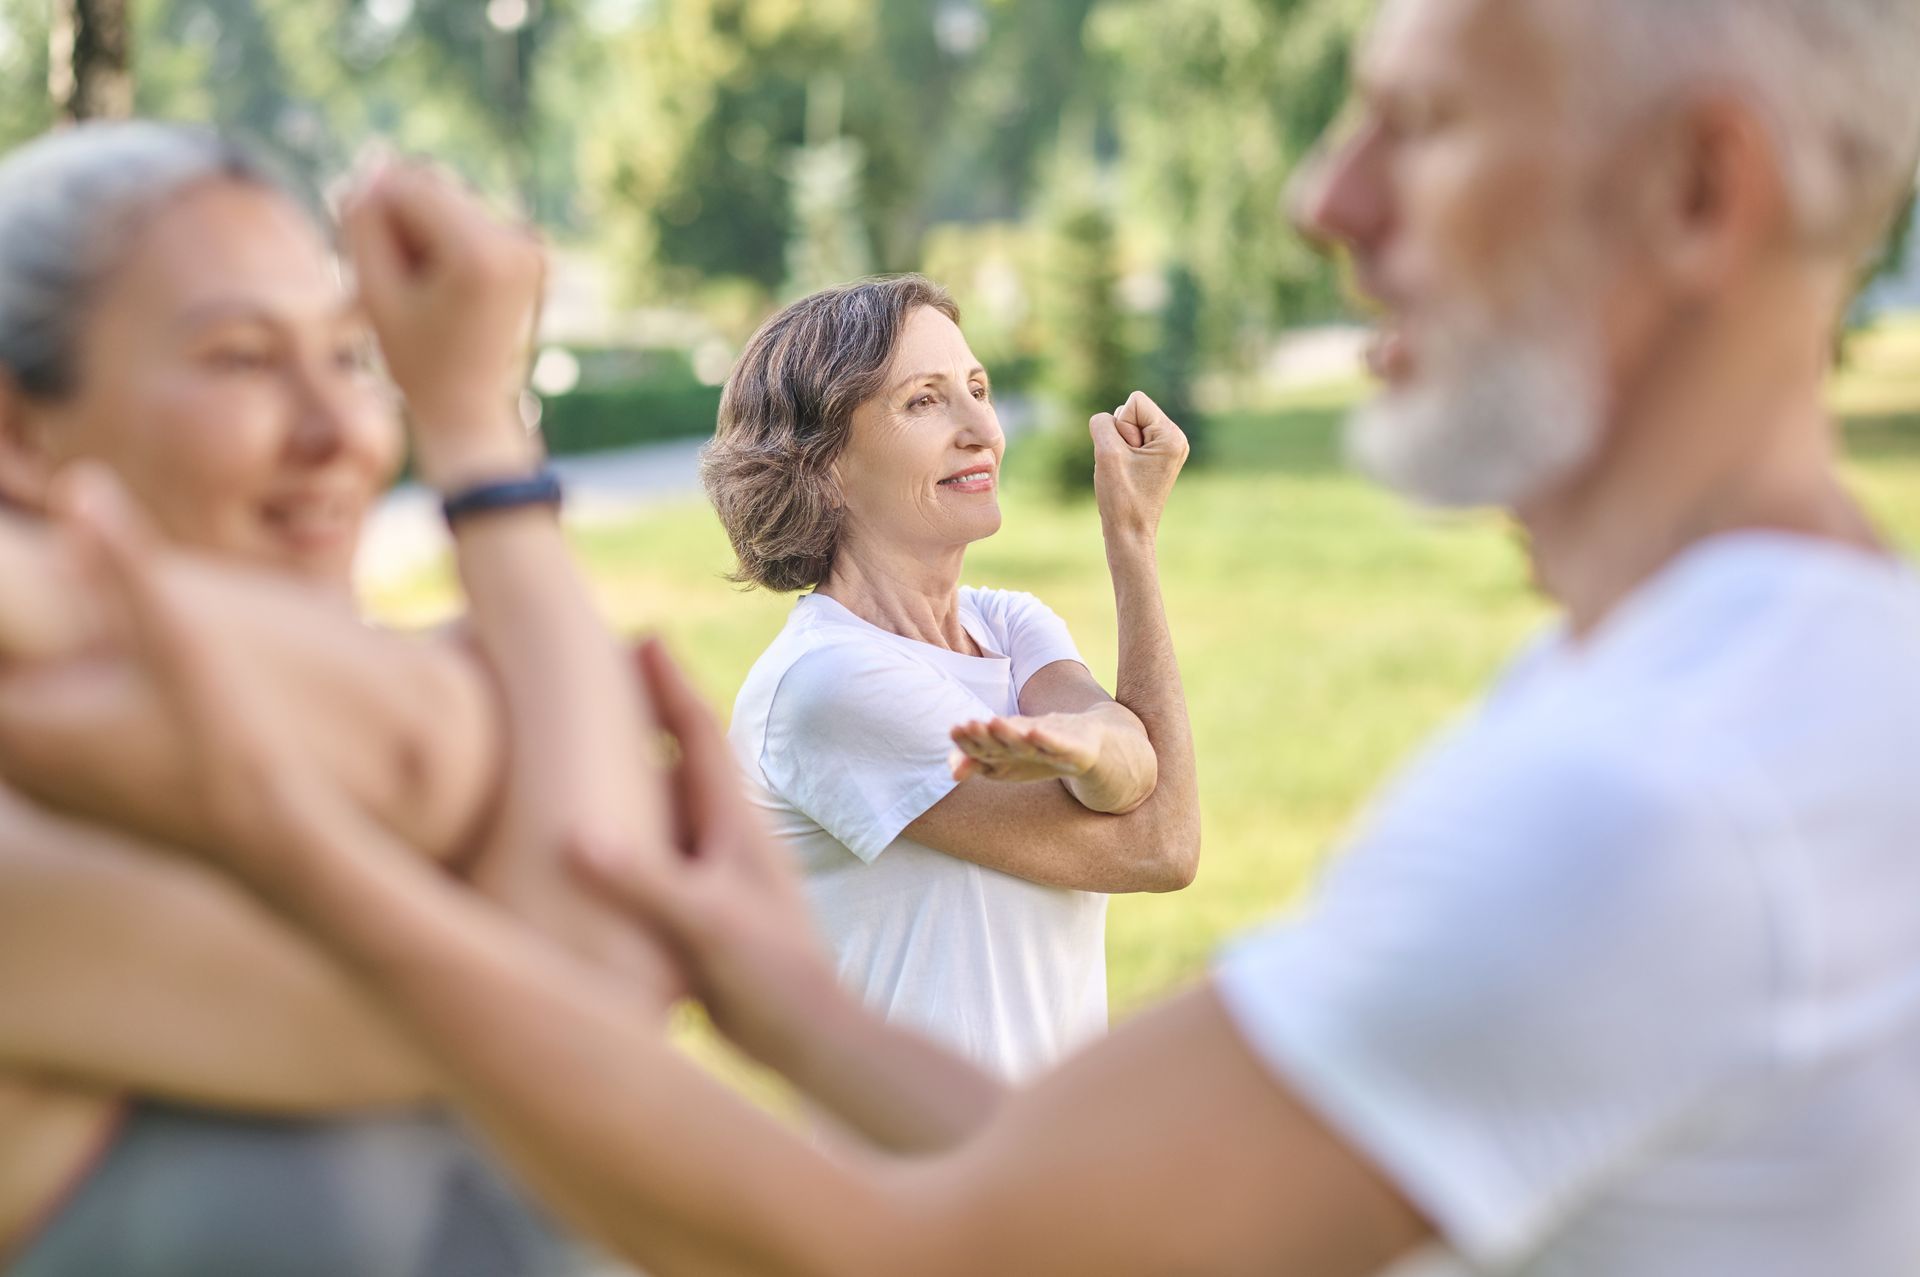 A group of elderly people are stretching their arms in a park.